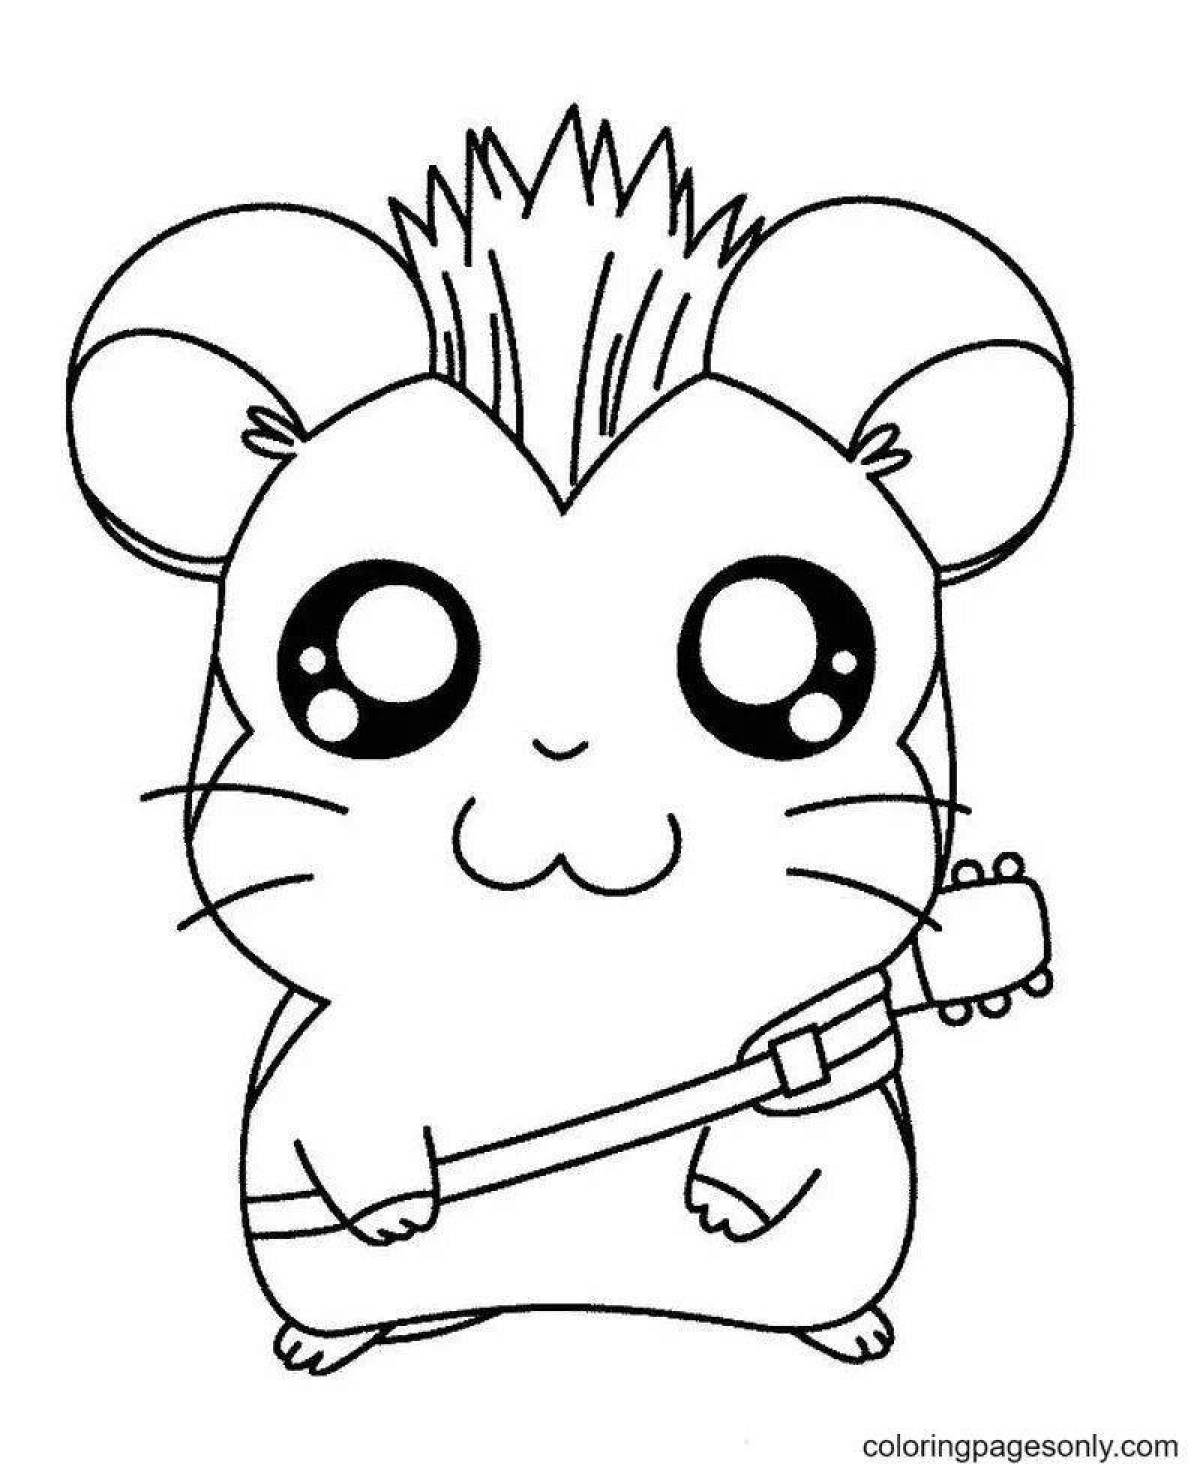 Fluffy hamster coloring book